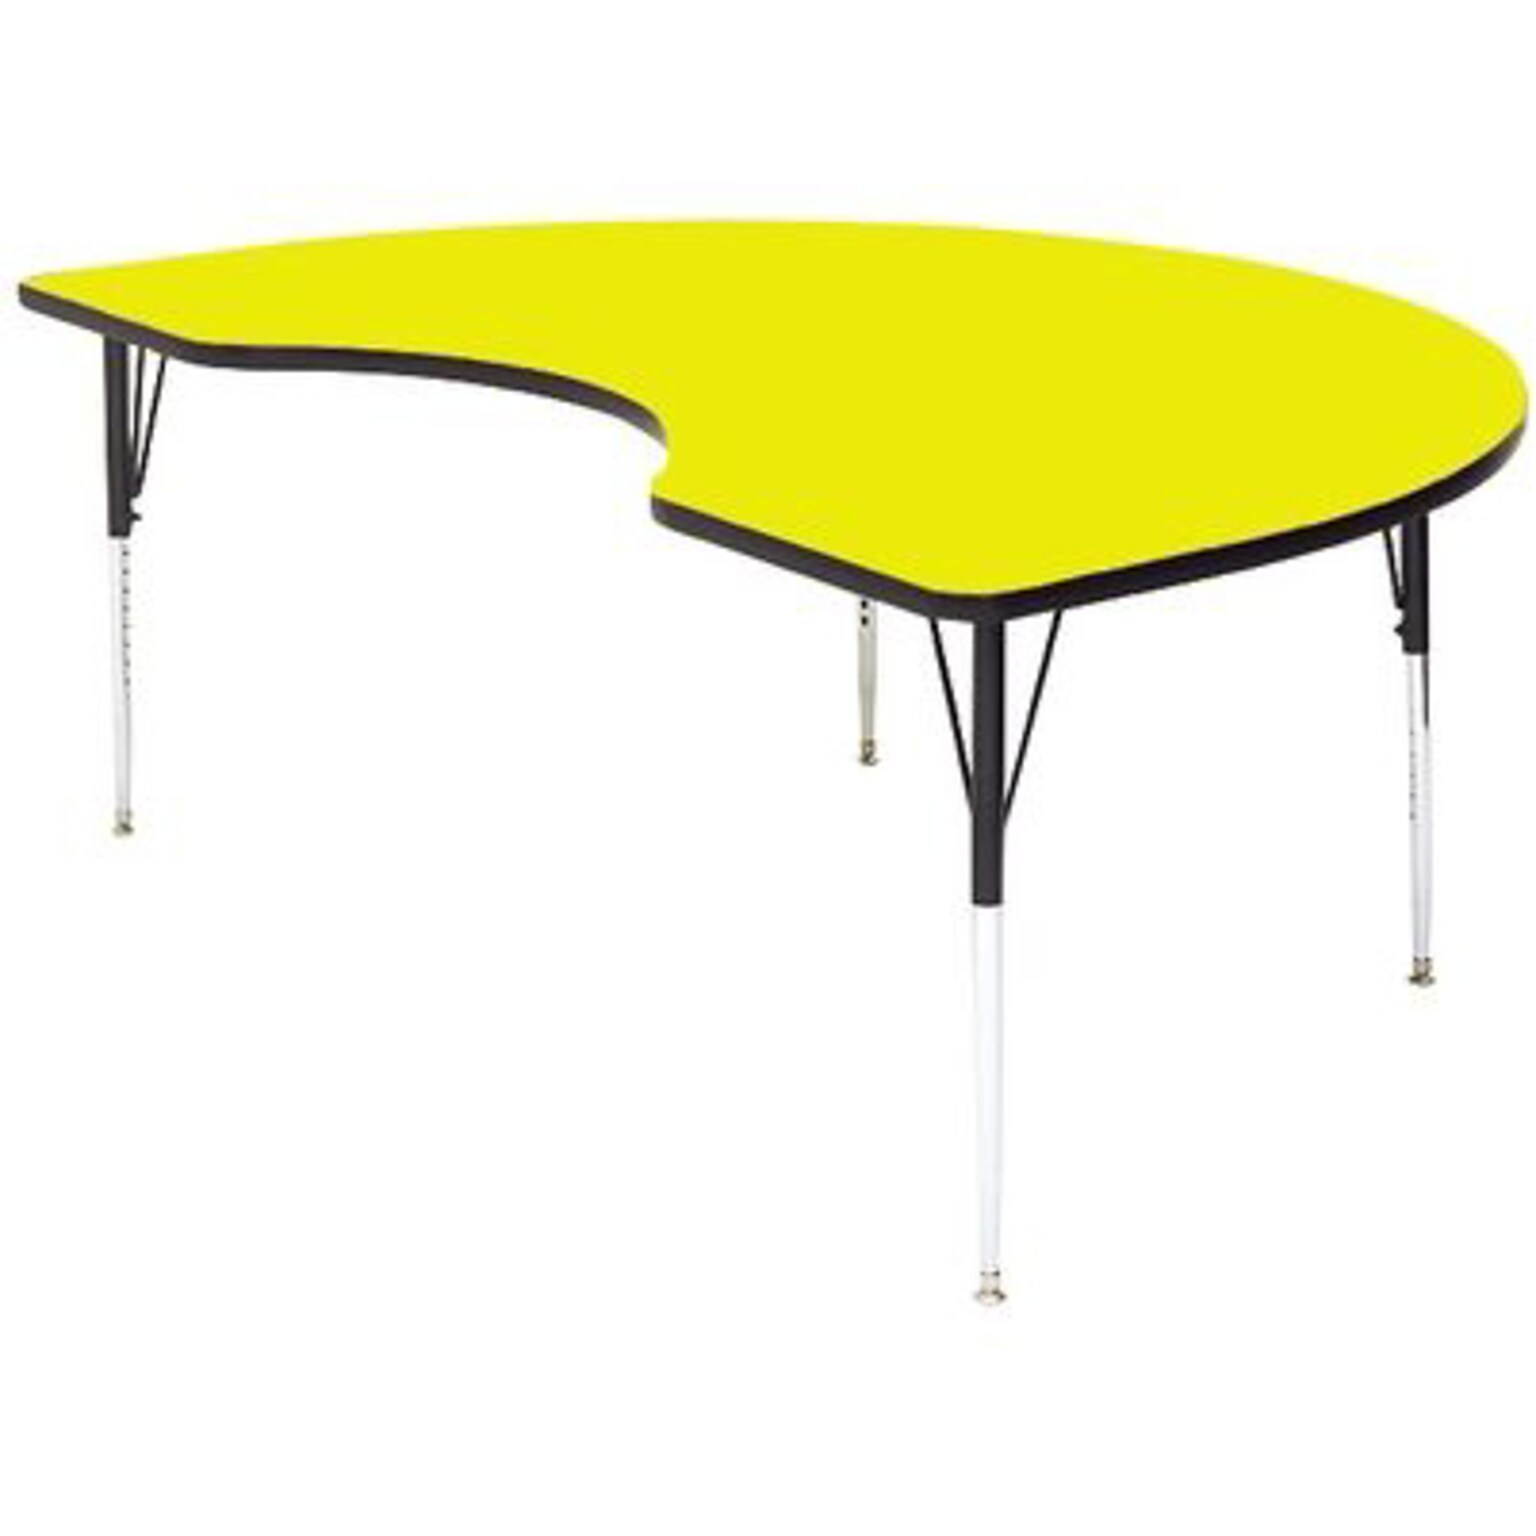 Correll® 48D x 72L Kidney Shaped Heavy Duty Activity Table; Yellow High Pressure Laminate Top